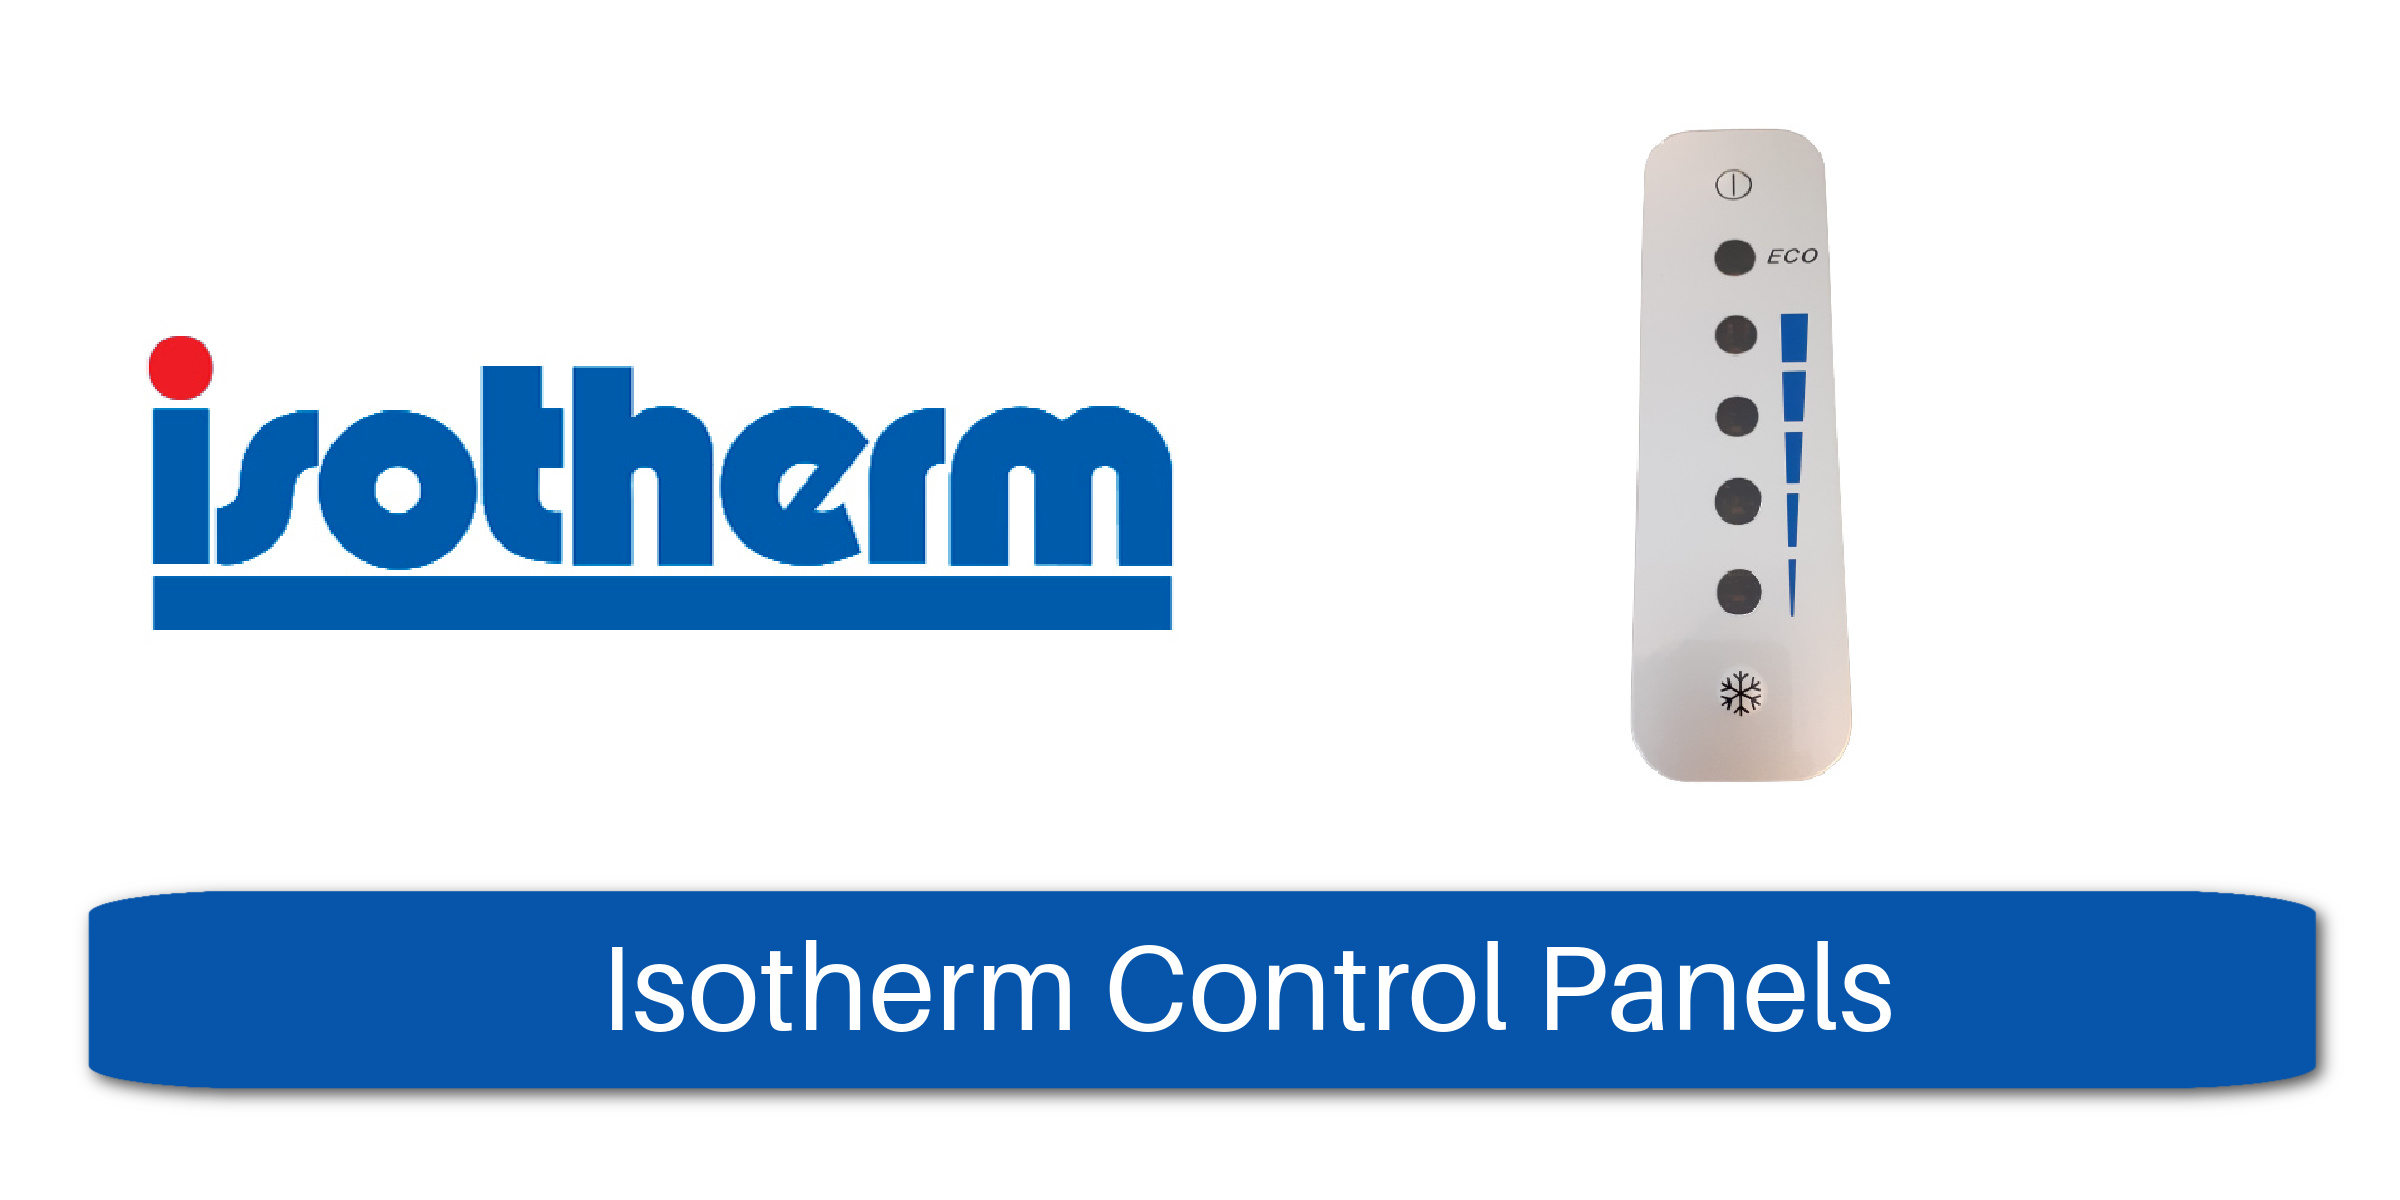 Isotherm Control Panels